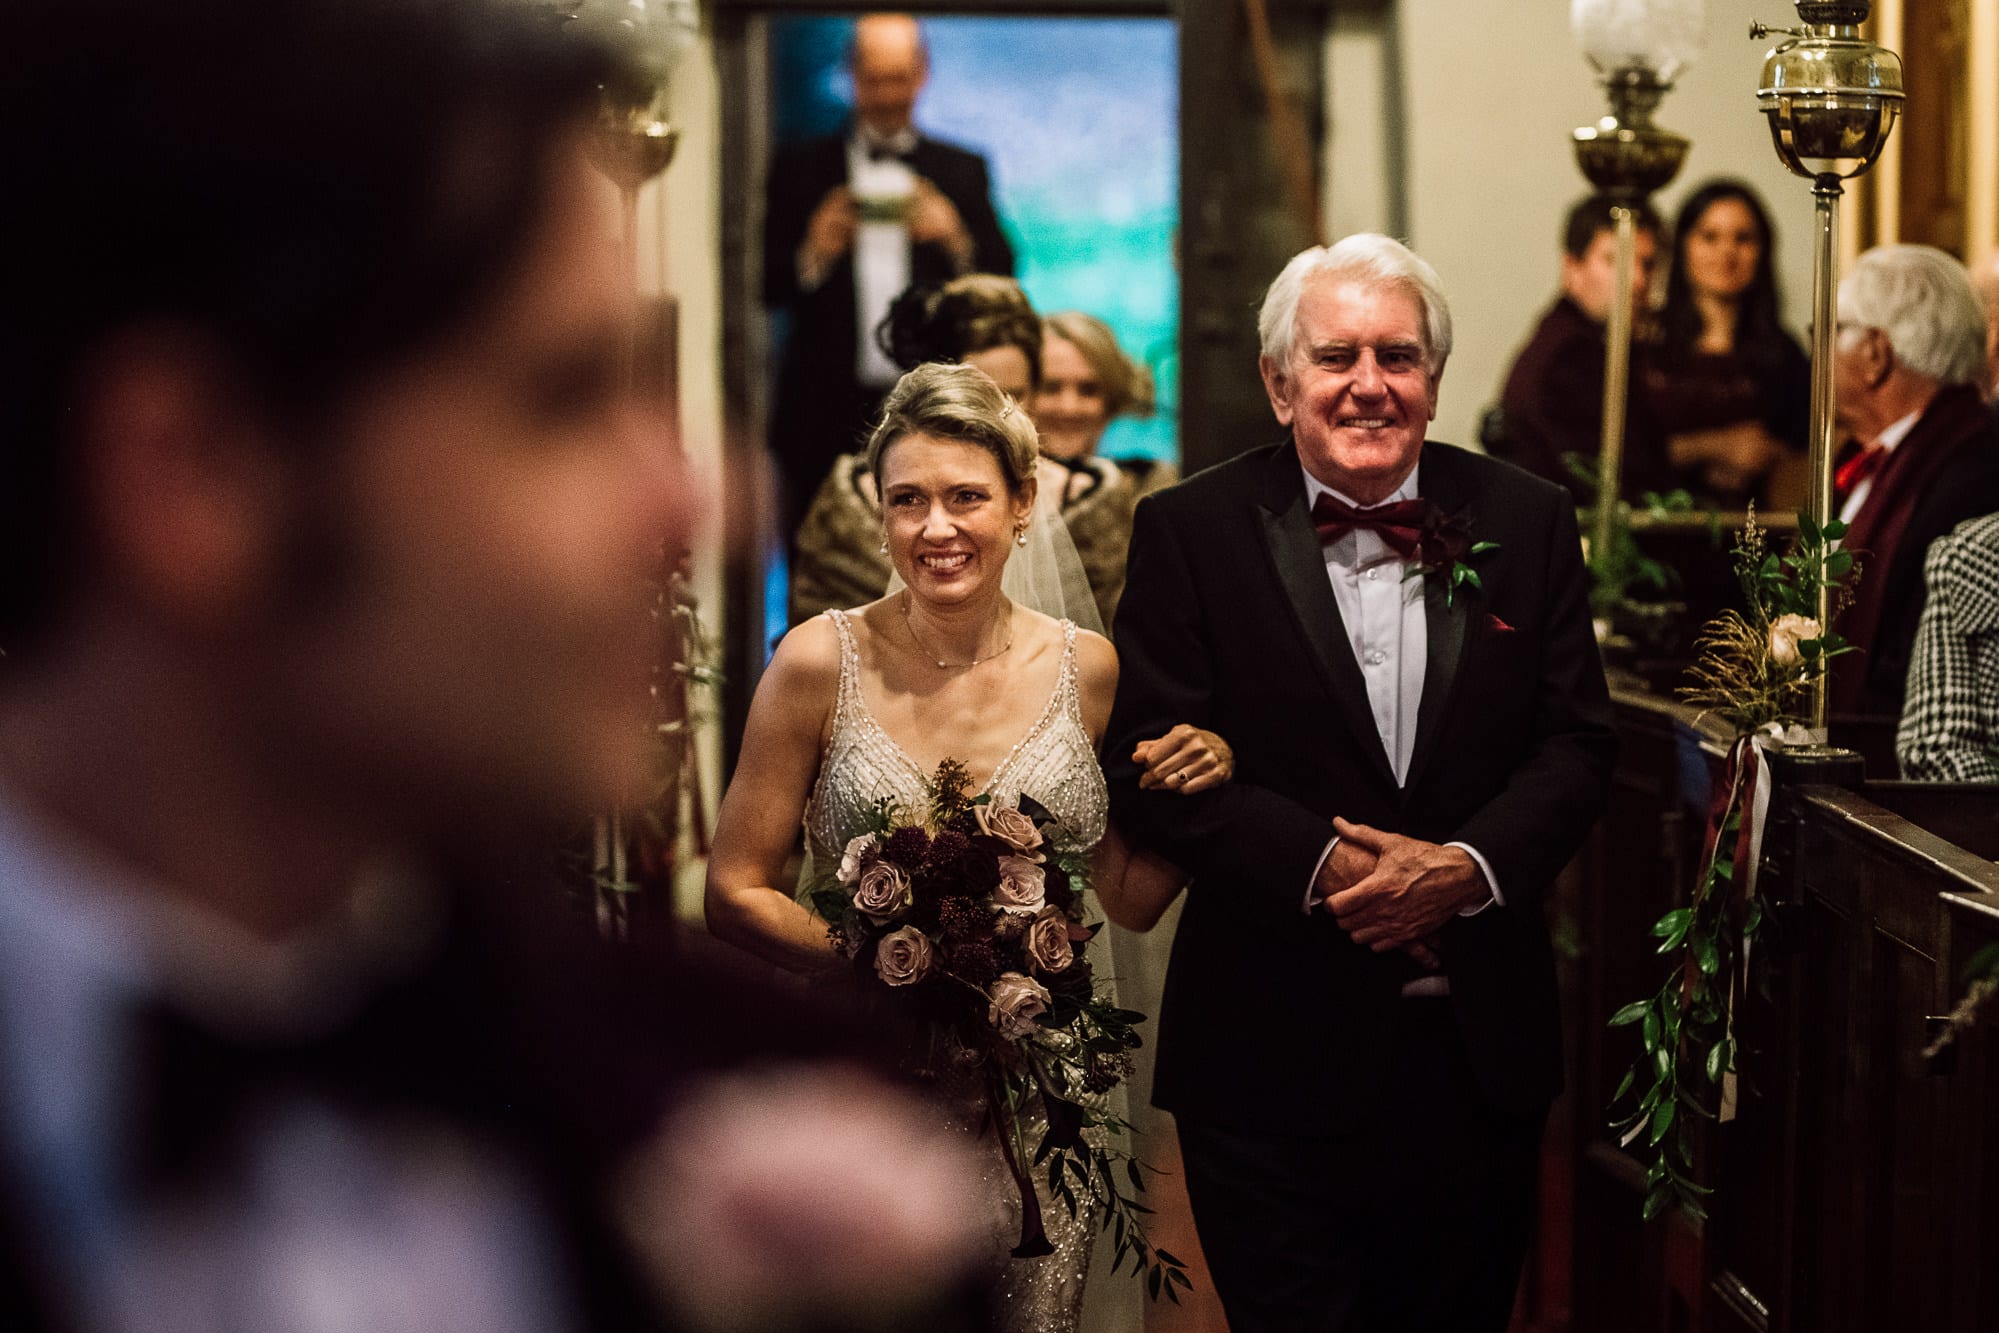 Bride and her dad walking down the aisle